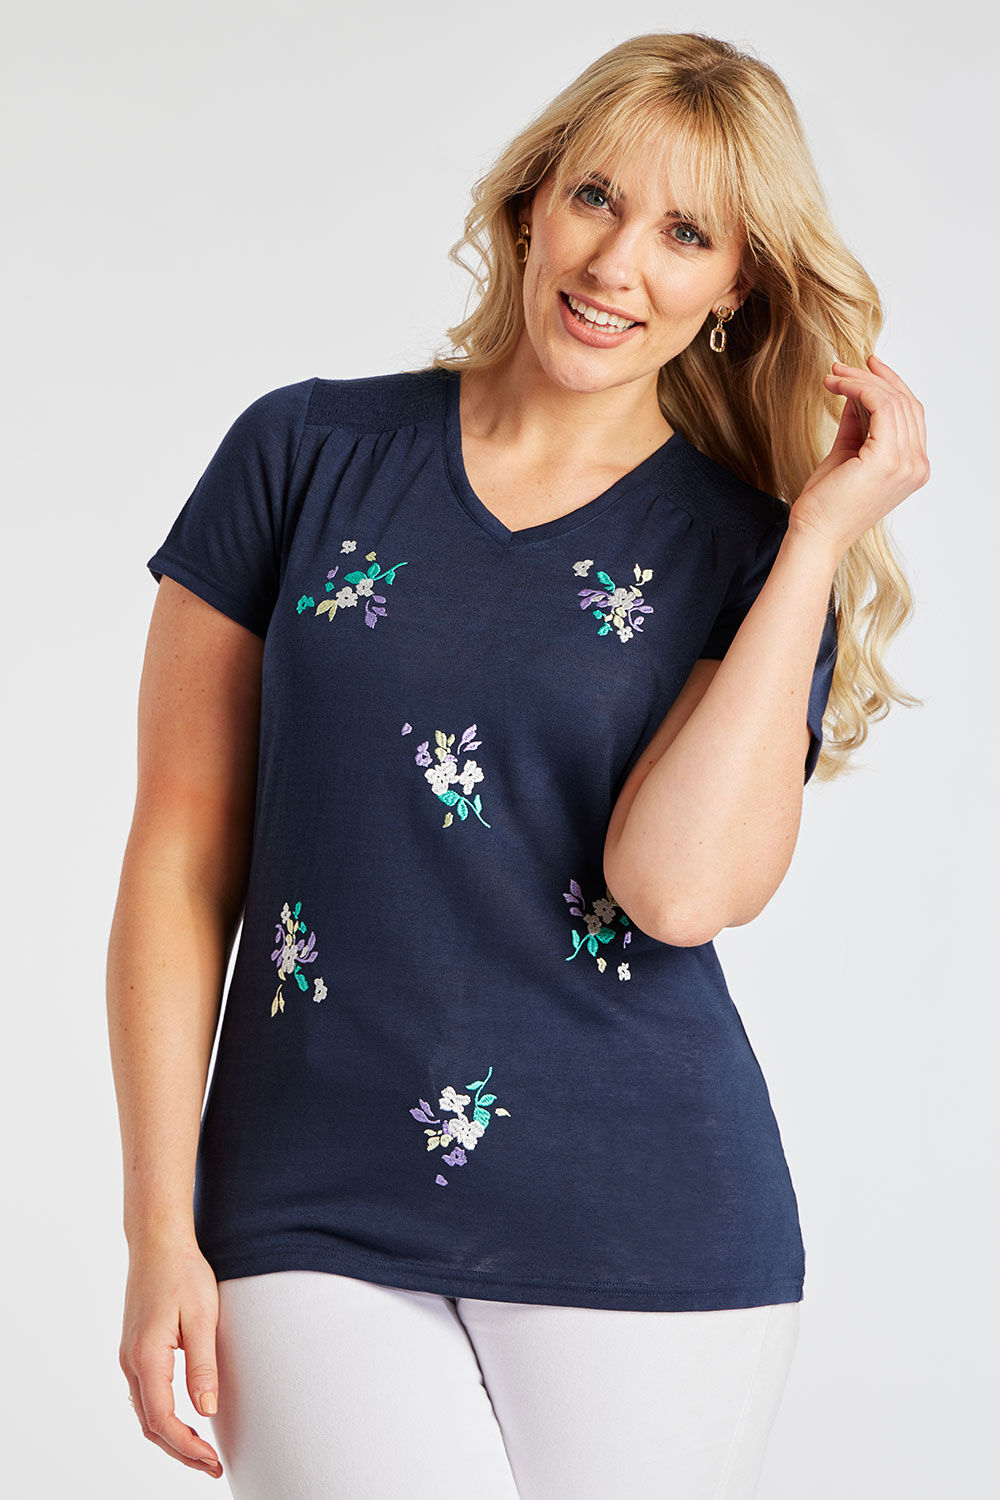 Bonmarche Navy Short Sleeves Embroidered Flower T-Shirt, Size: 14